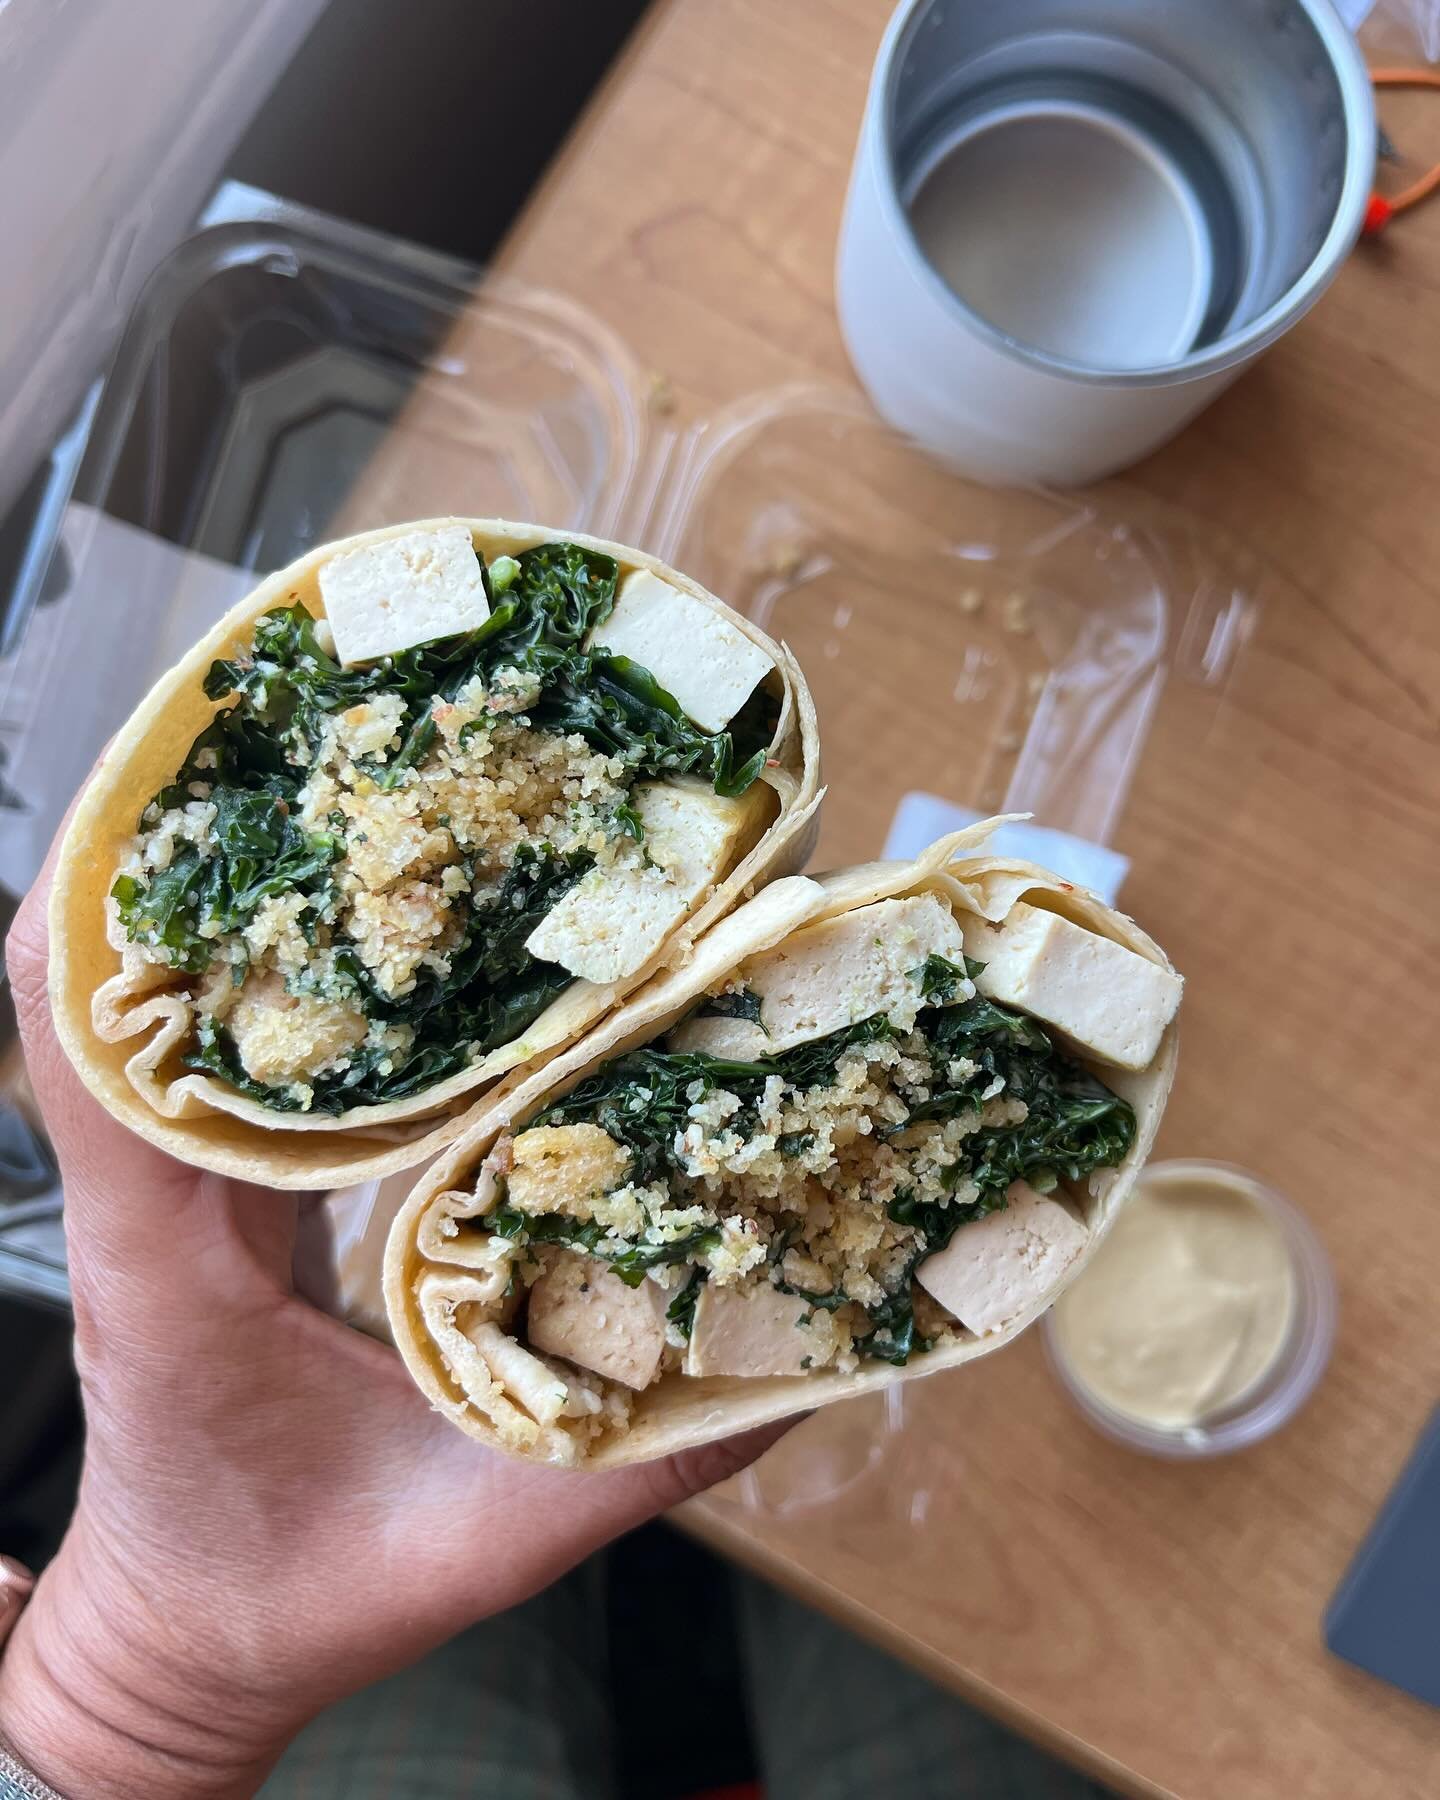 Need something vegan and on the go? We got your back. Our tofu kale caesar wrap is a yummy protein-packed salad in a wrap, with a convenient little vegan caesar dipping sauce if you need some extra.